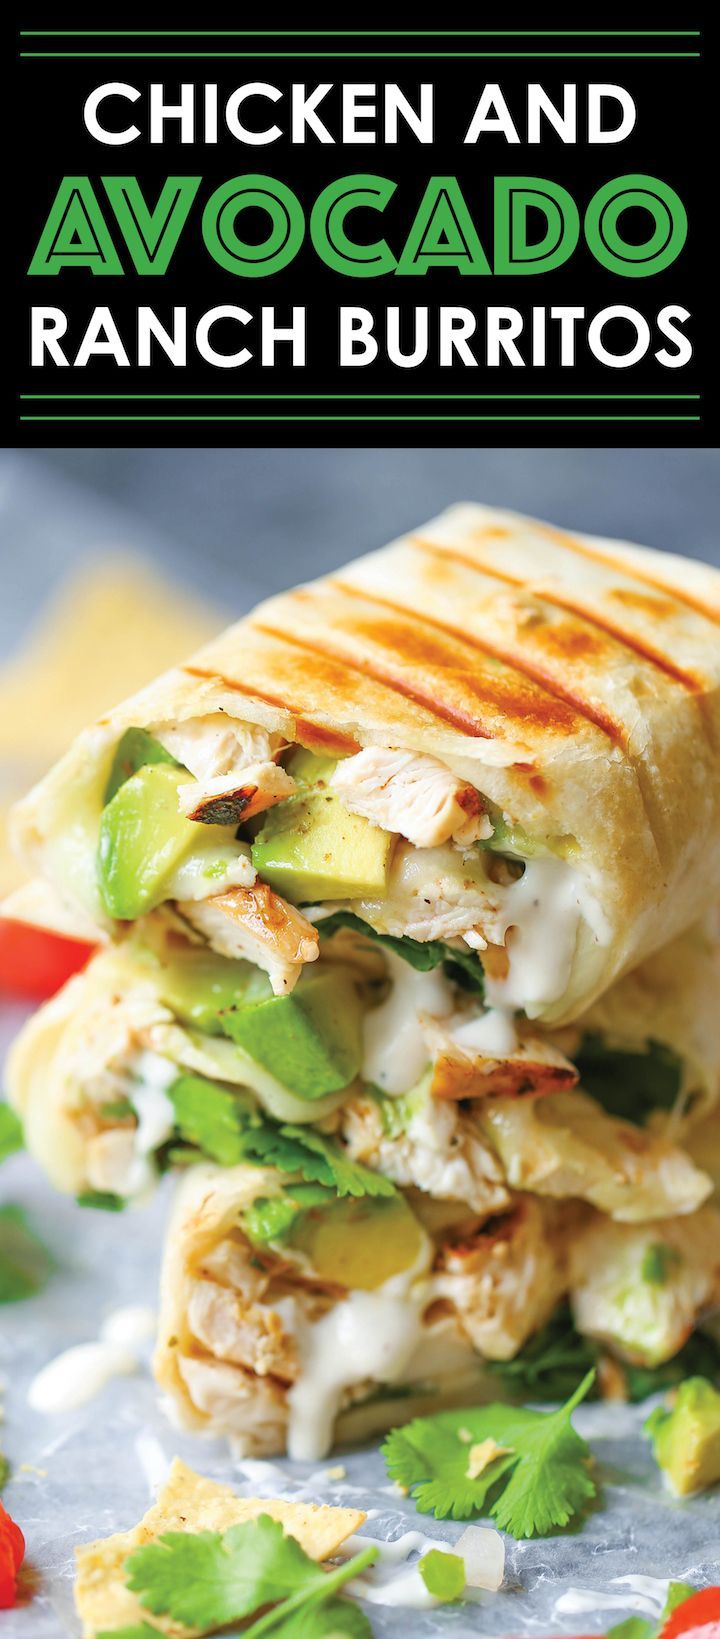 Chicken and Avocado Ranch Burritos – These come together with just 15 min prep! Yo